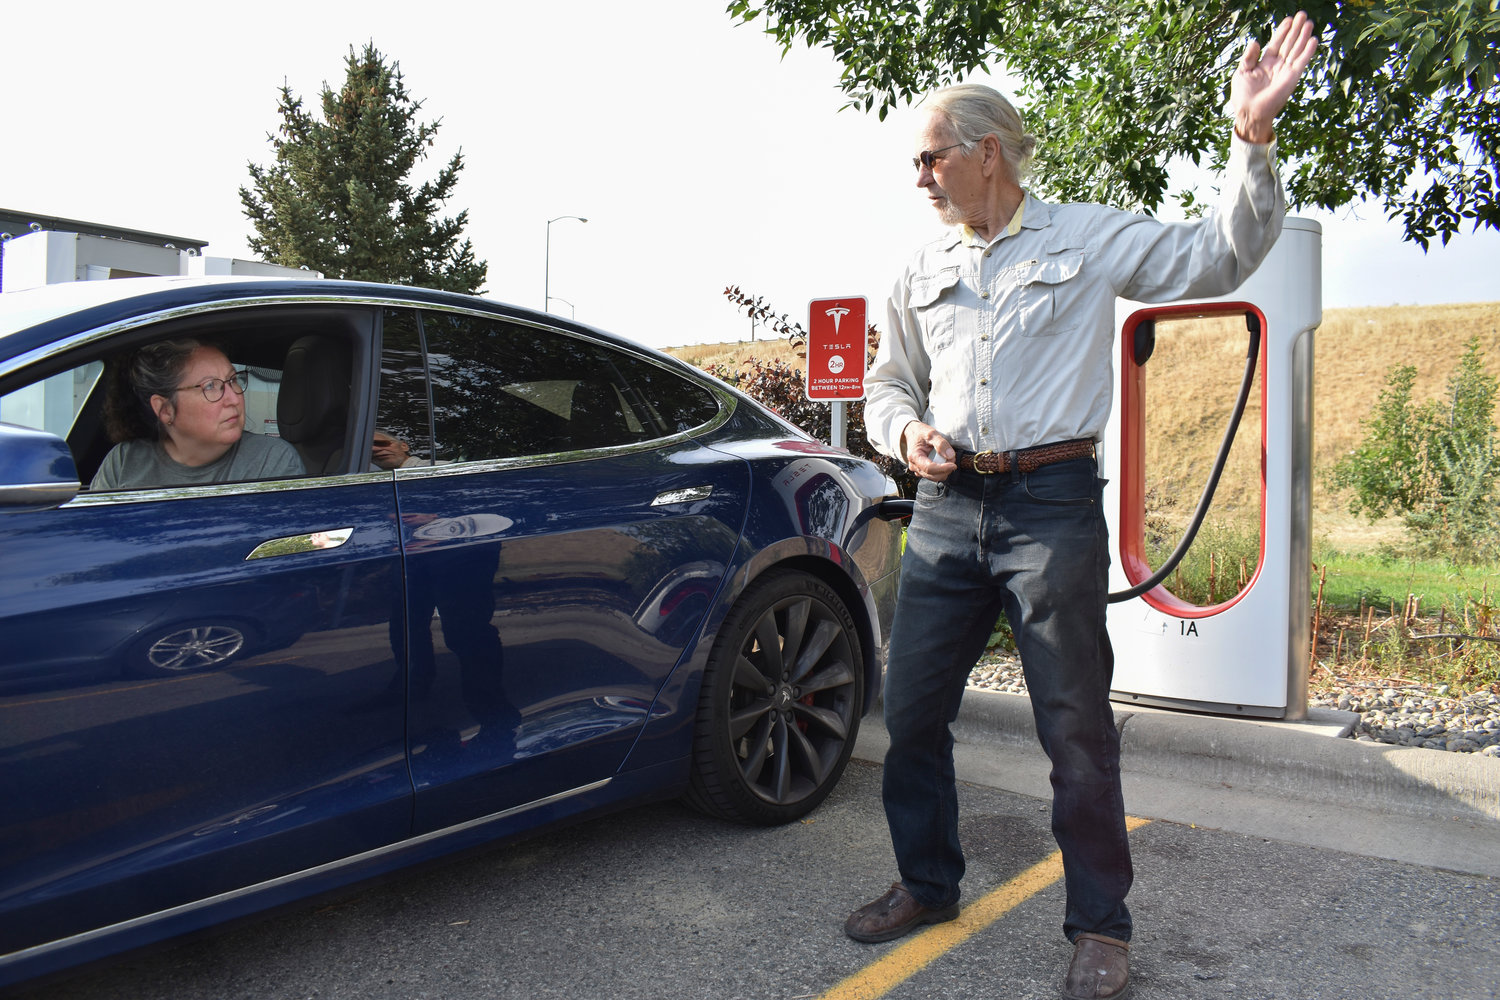 Jeannette Englehart of Billings, Mont. speaks with fellow electric vehicle owner Bob Palrud of Spokane, Wash. as they charge their cars at a station near Interstate 90, on Wednesday Sept. 14, 2022, in Billings, Mont. Englehart said there are not many charging stations in rural areas of Montana and she primarily uses the vehicle for local trips. (AP Photo/Matthew Brown)